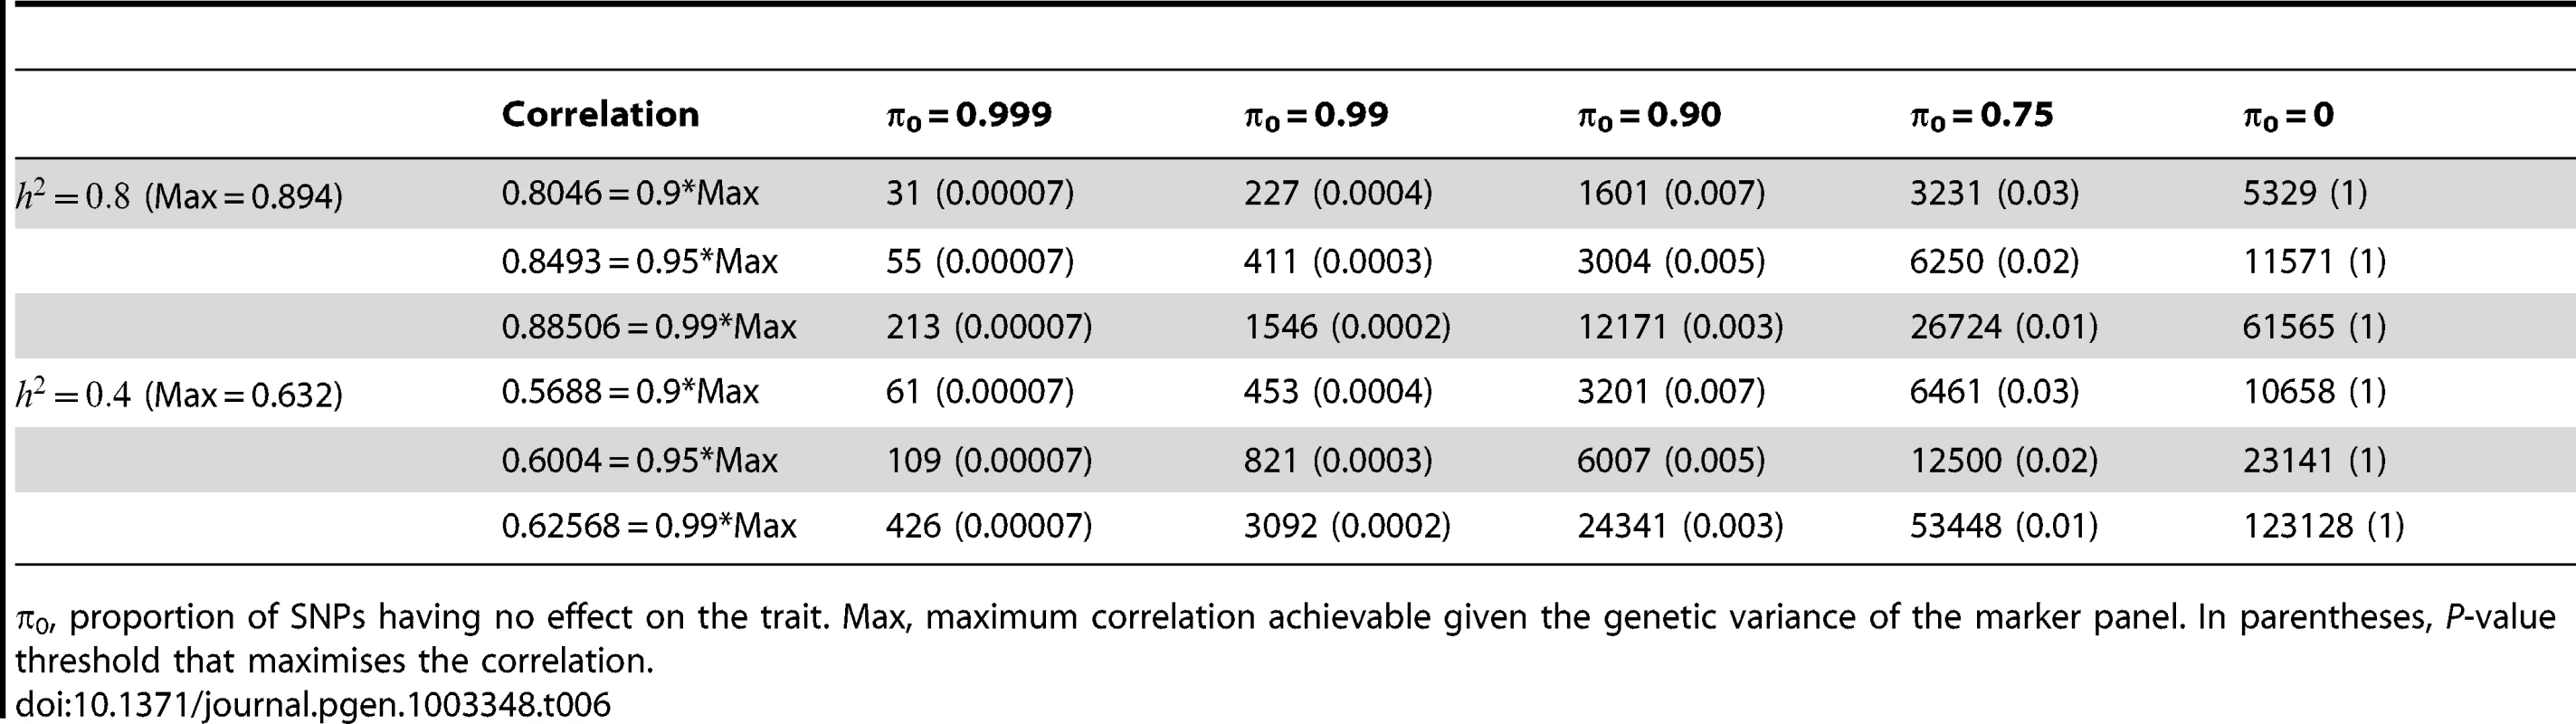 Numbers of subjects (in 1000s, rounded up) required to attain a specified correlation with a normal trait using a panel of 1,000,000 markers that explains the full heritability.